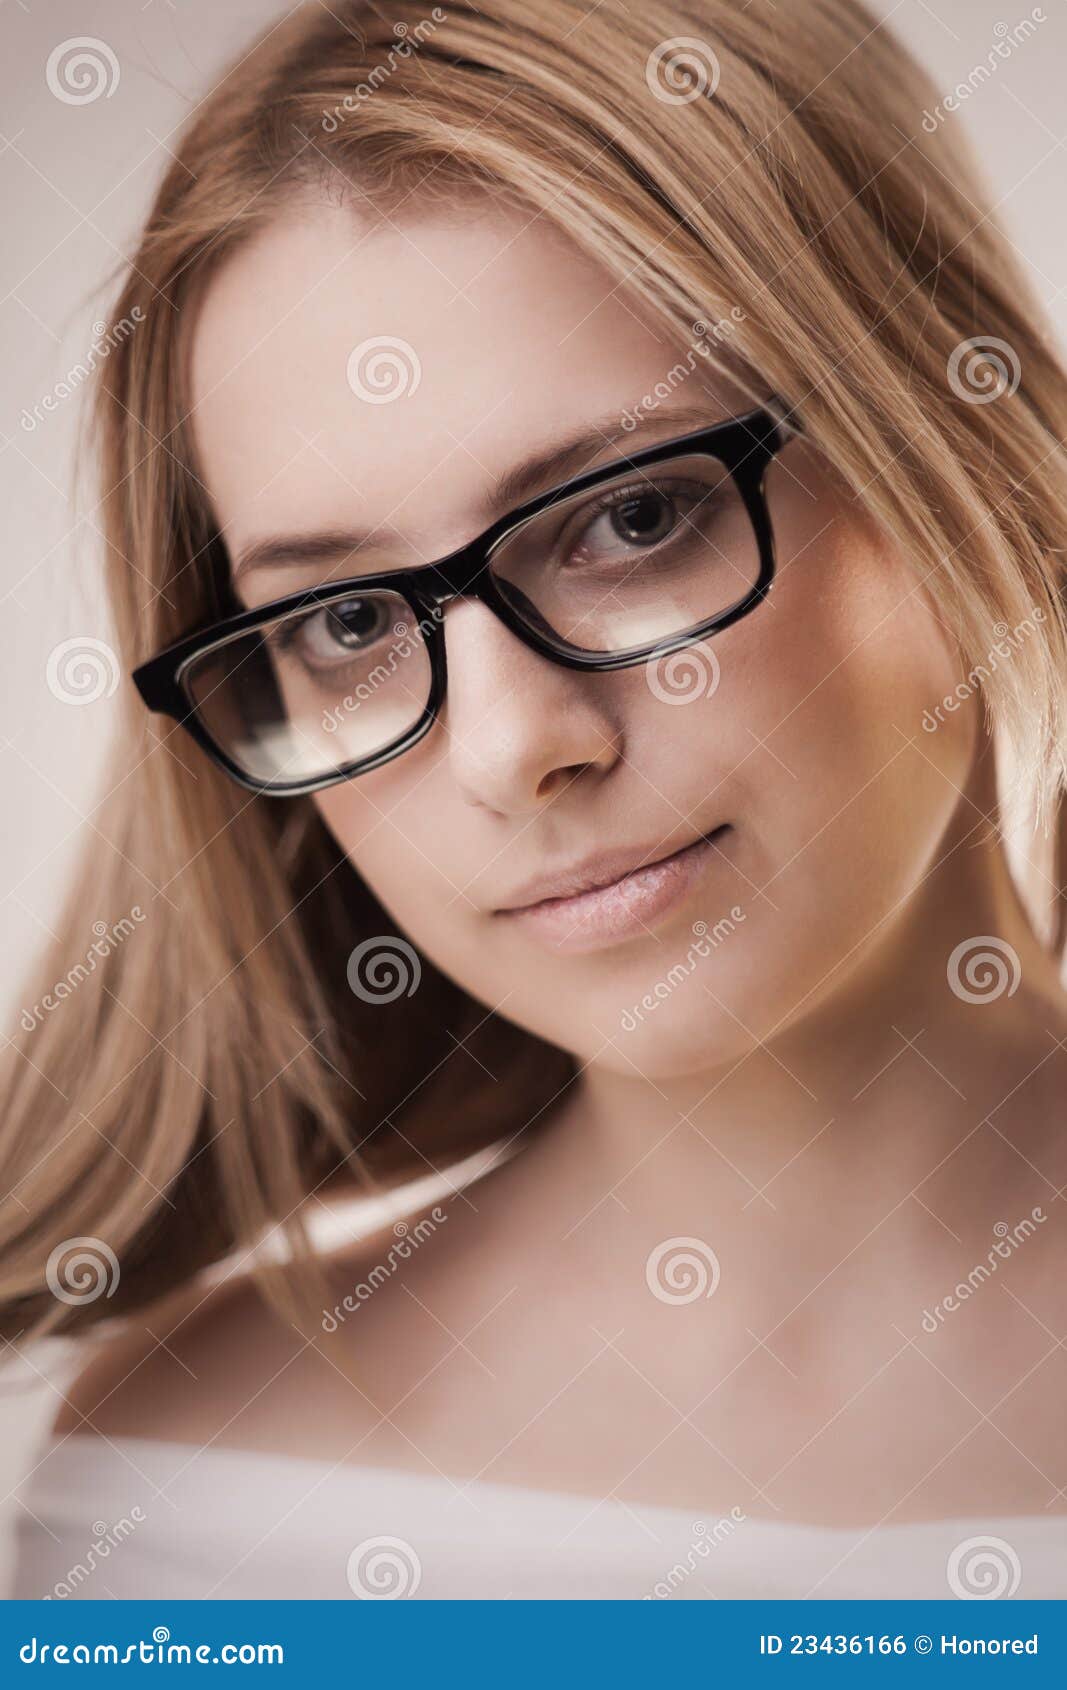 Cute Girl Wearing Glasses Royalty Free Stock Image Image